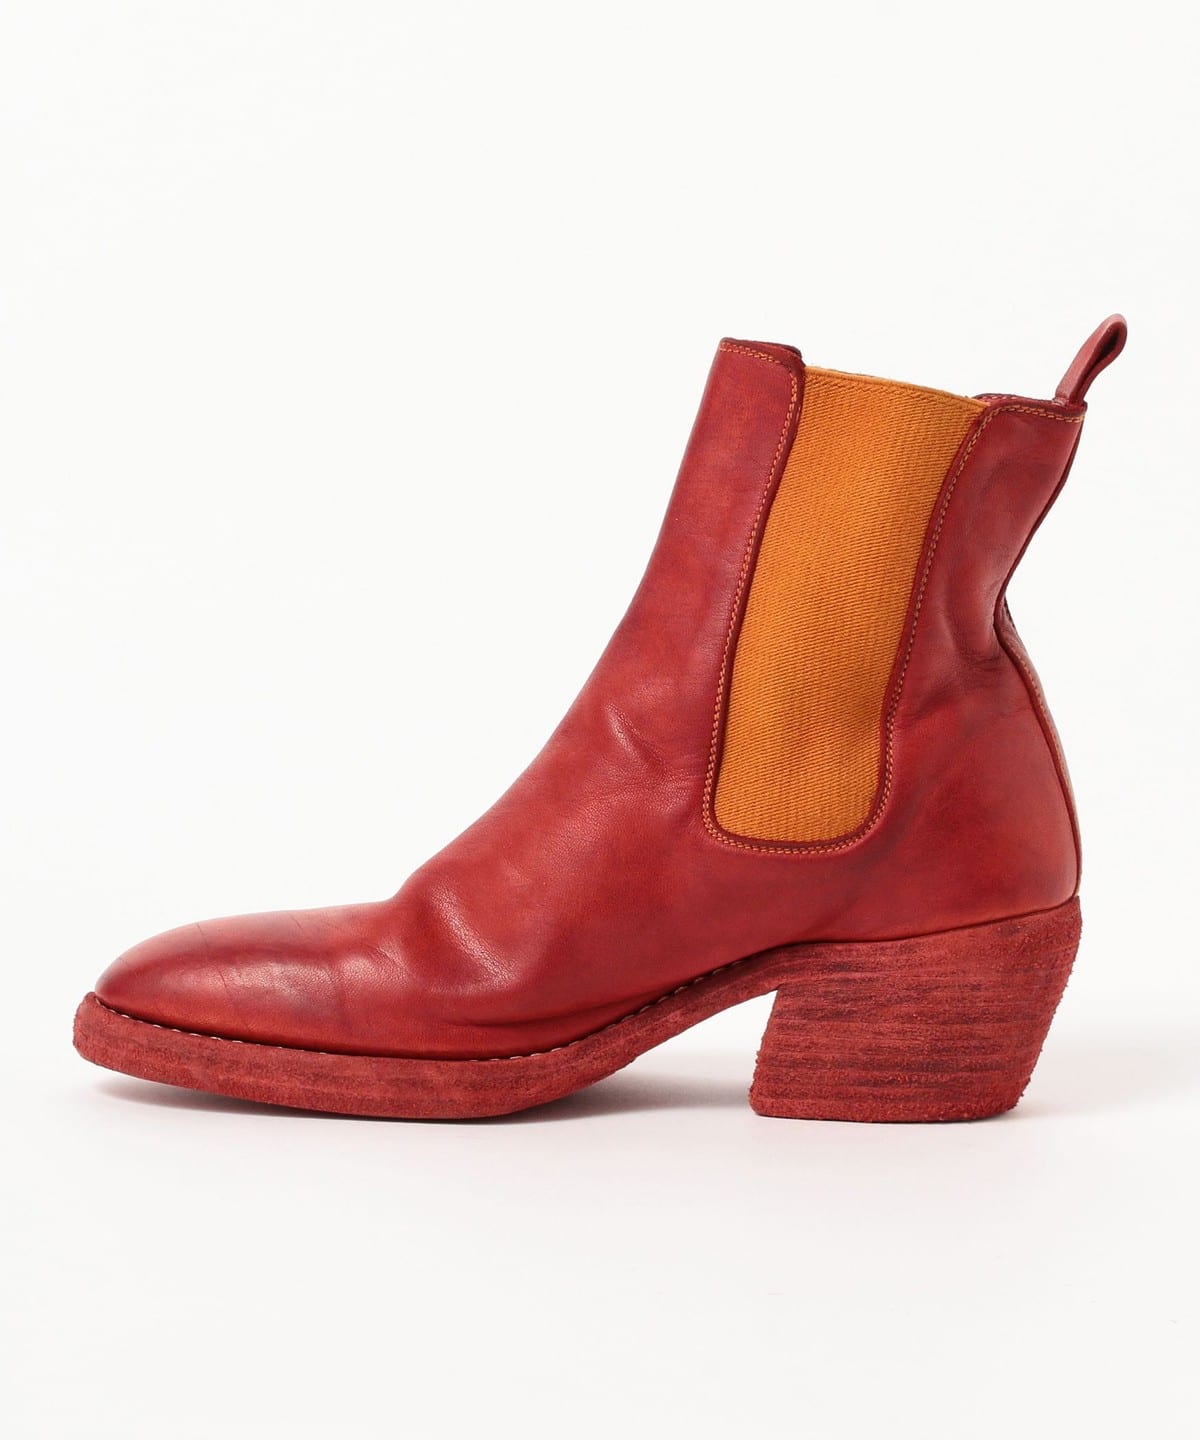 GUIDI / VG06 Side Gore Boots - International Gallery BEAMS